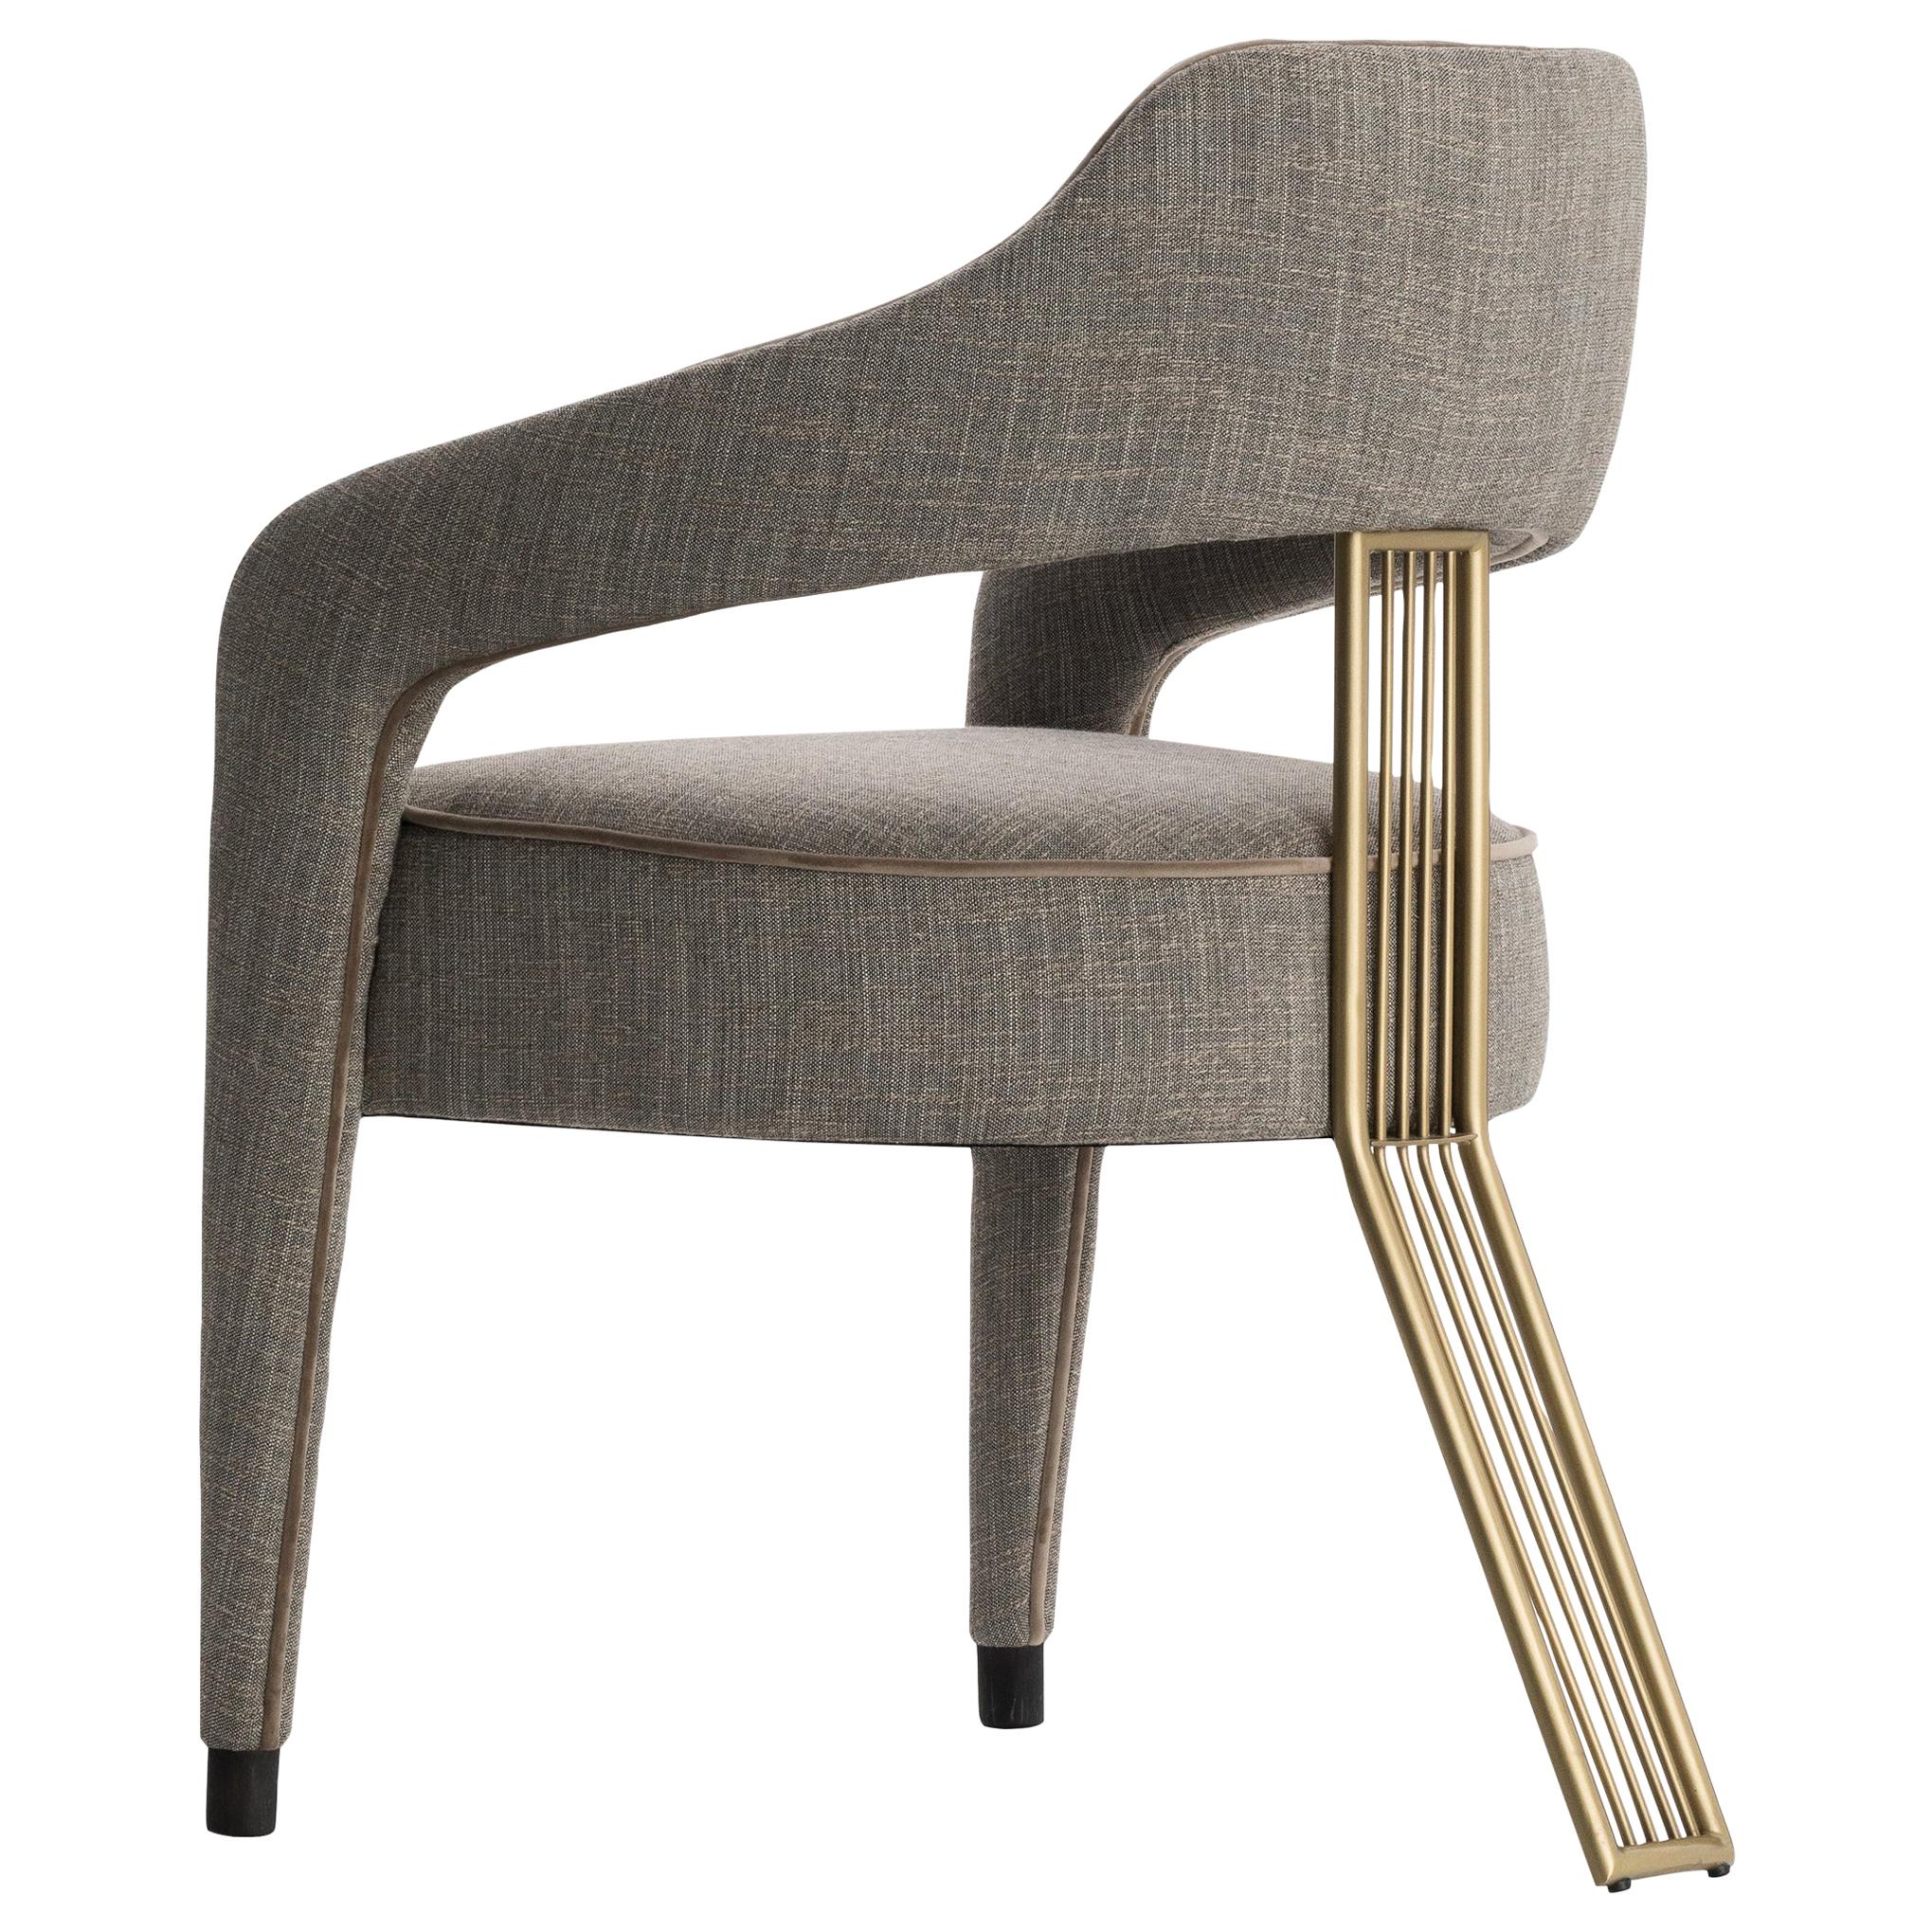 The INVICTA II dining chair has an exclusive and impressive design, with just one leg in the back, it brings sophistication to all dining room.‎‎ It is entirely upholstered in fabric with contrasting piping that run from the front legs along the